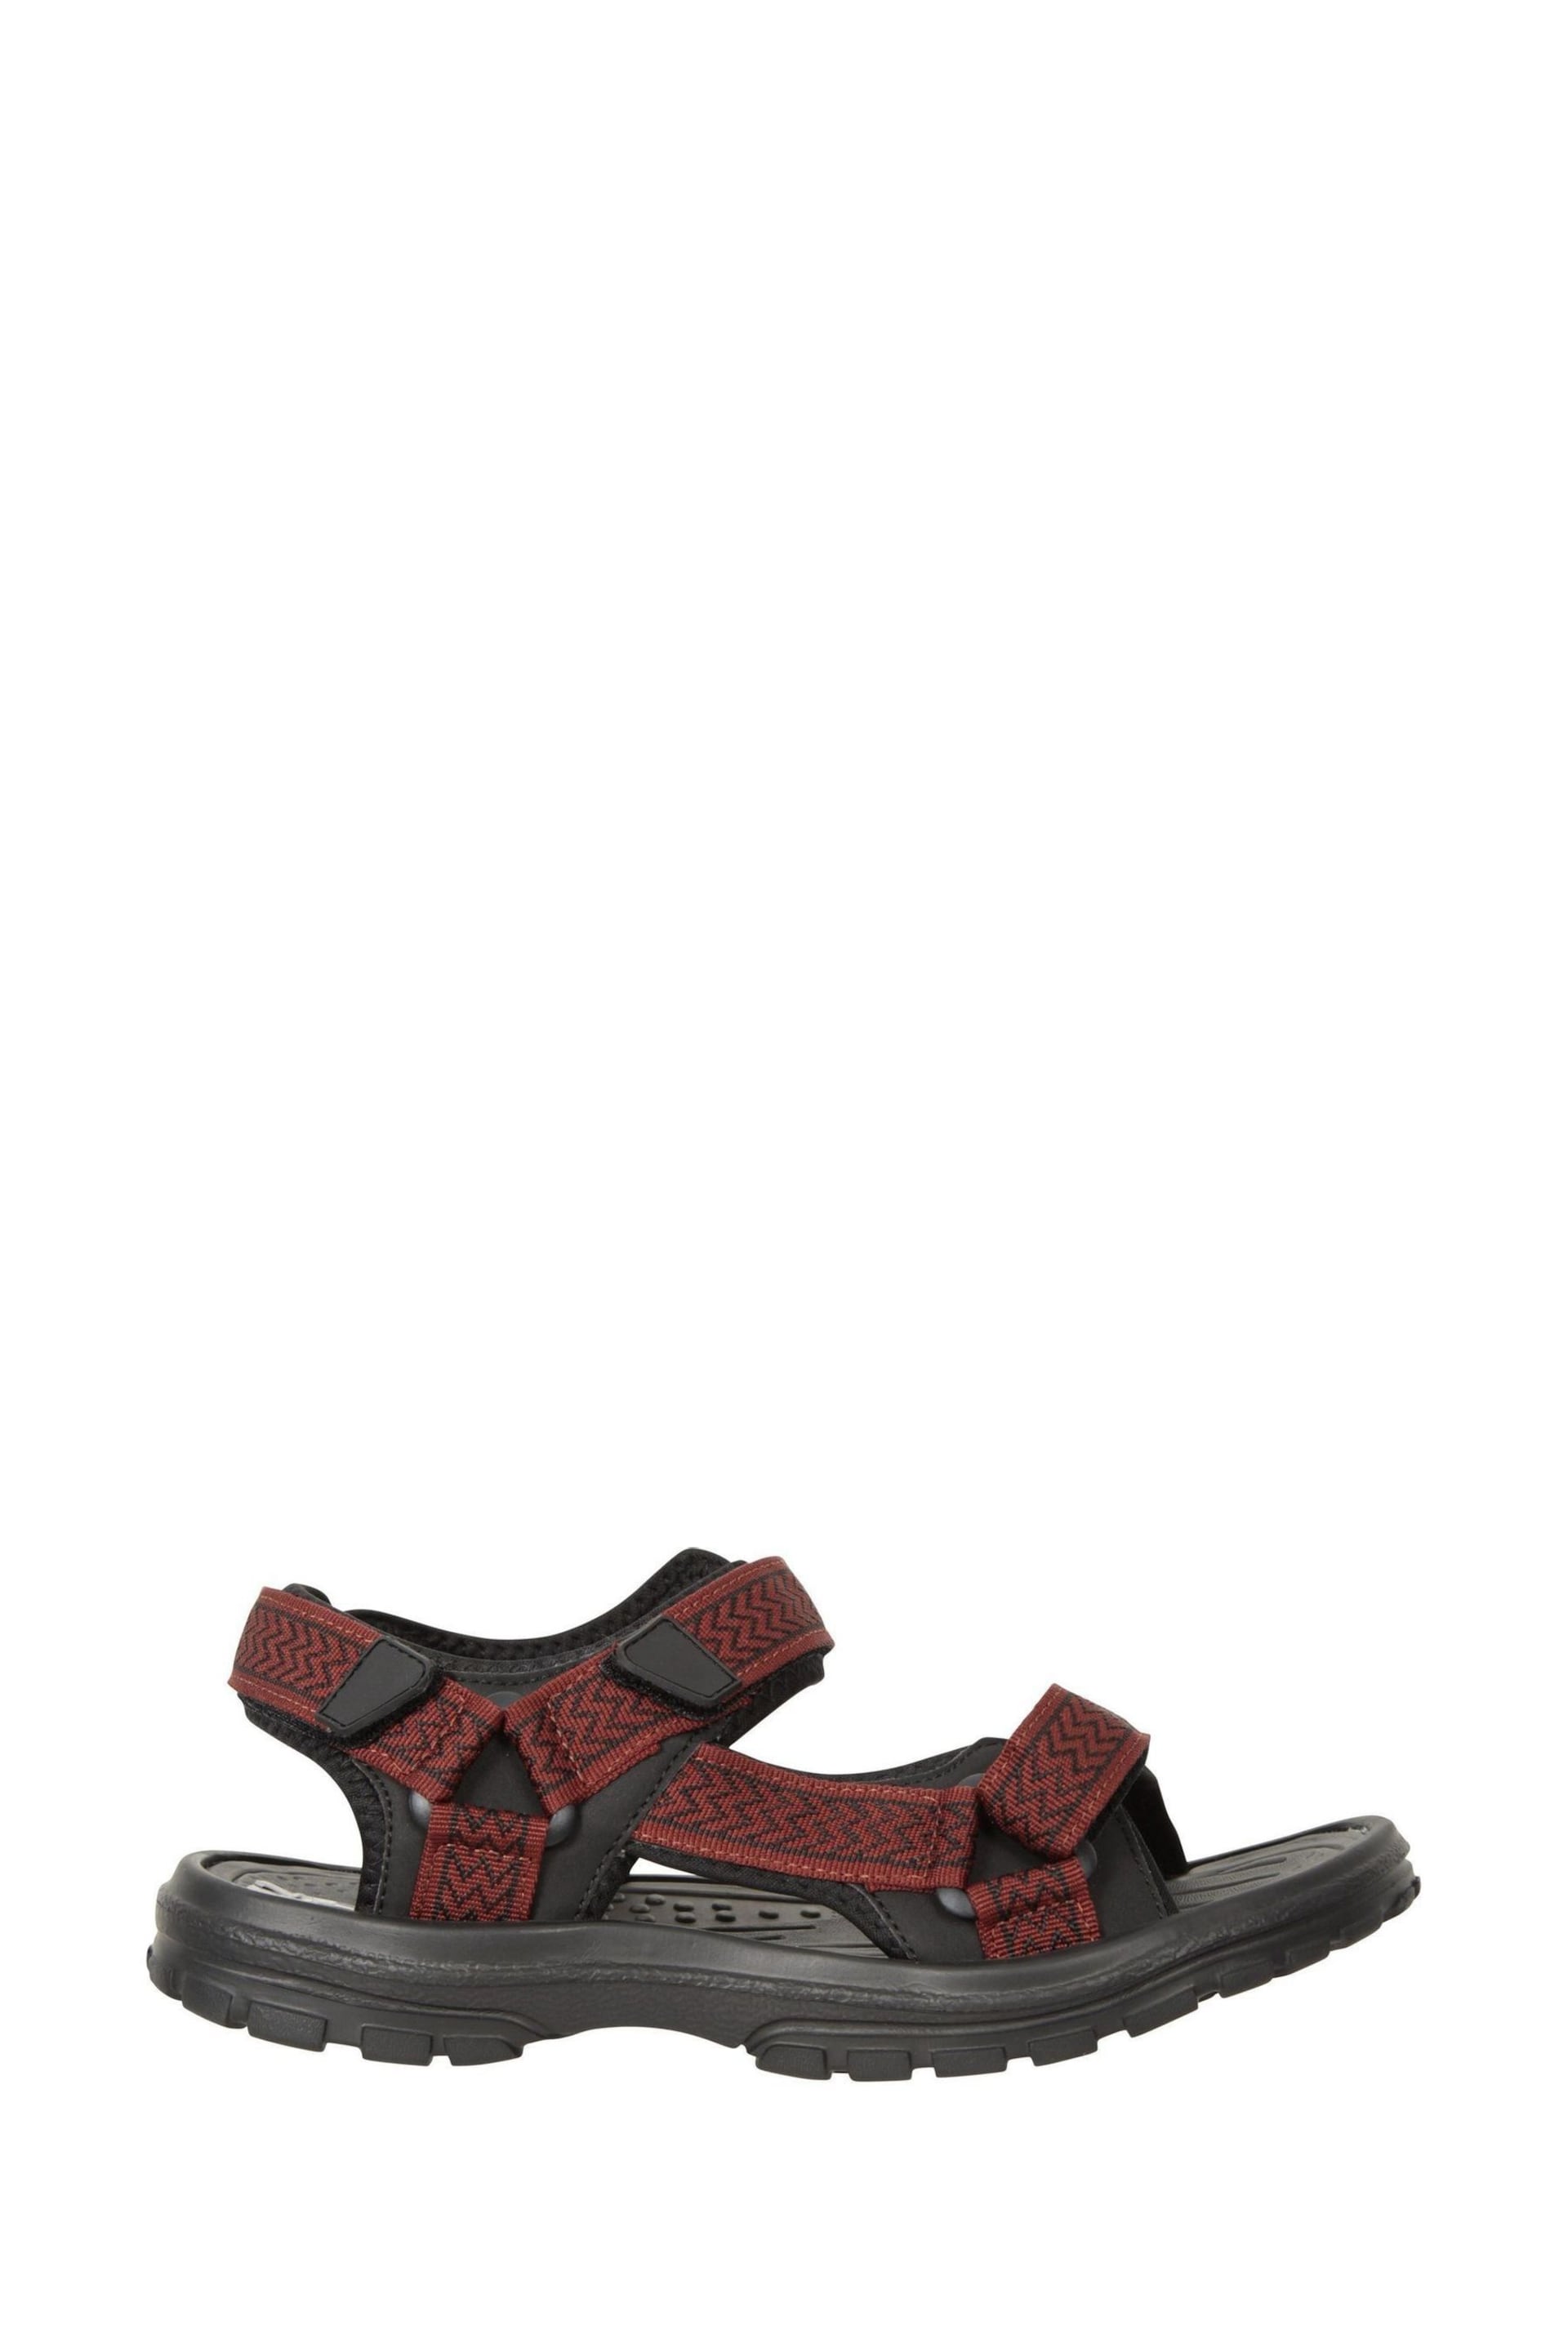 Mountain Warehouse Brown Crete Mens Sandals - Image 2 of 6